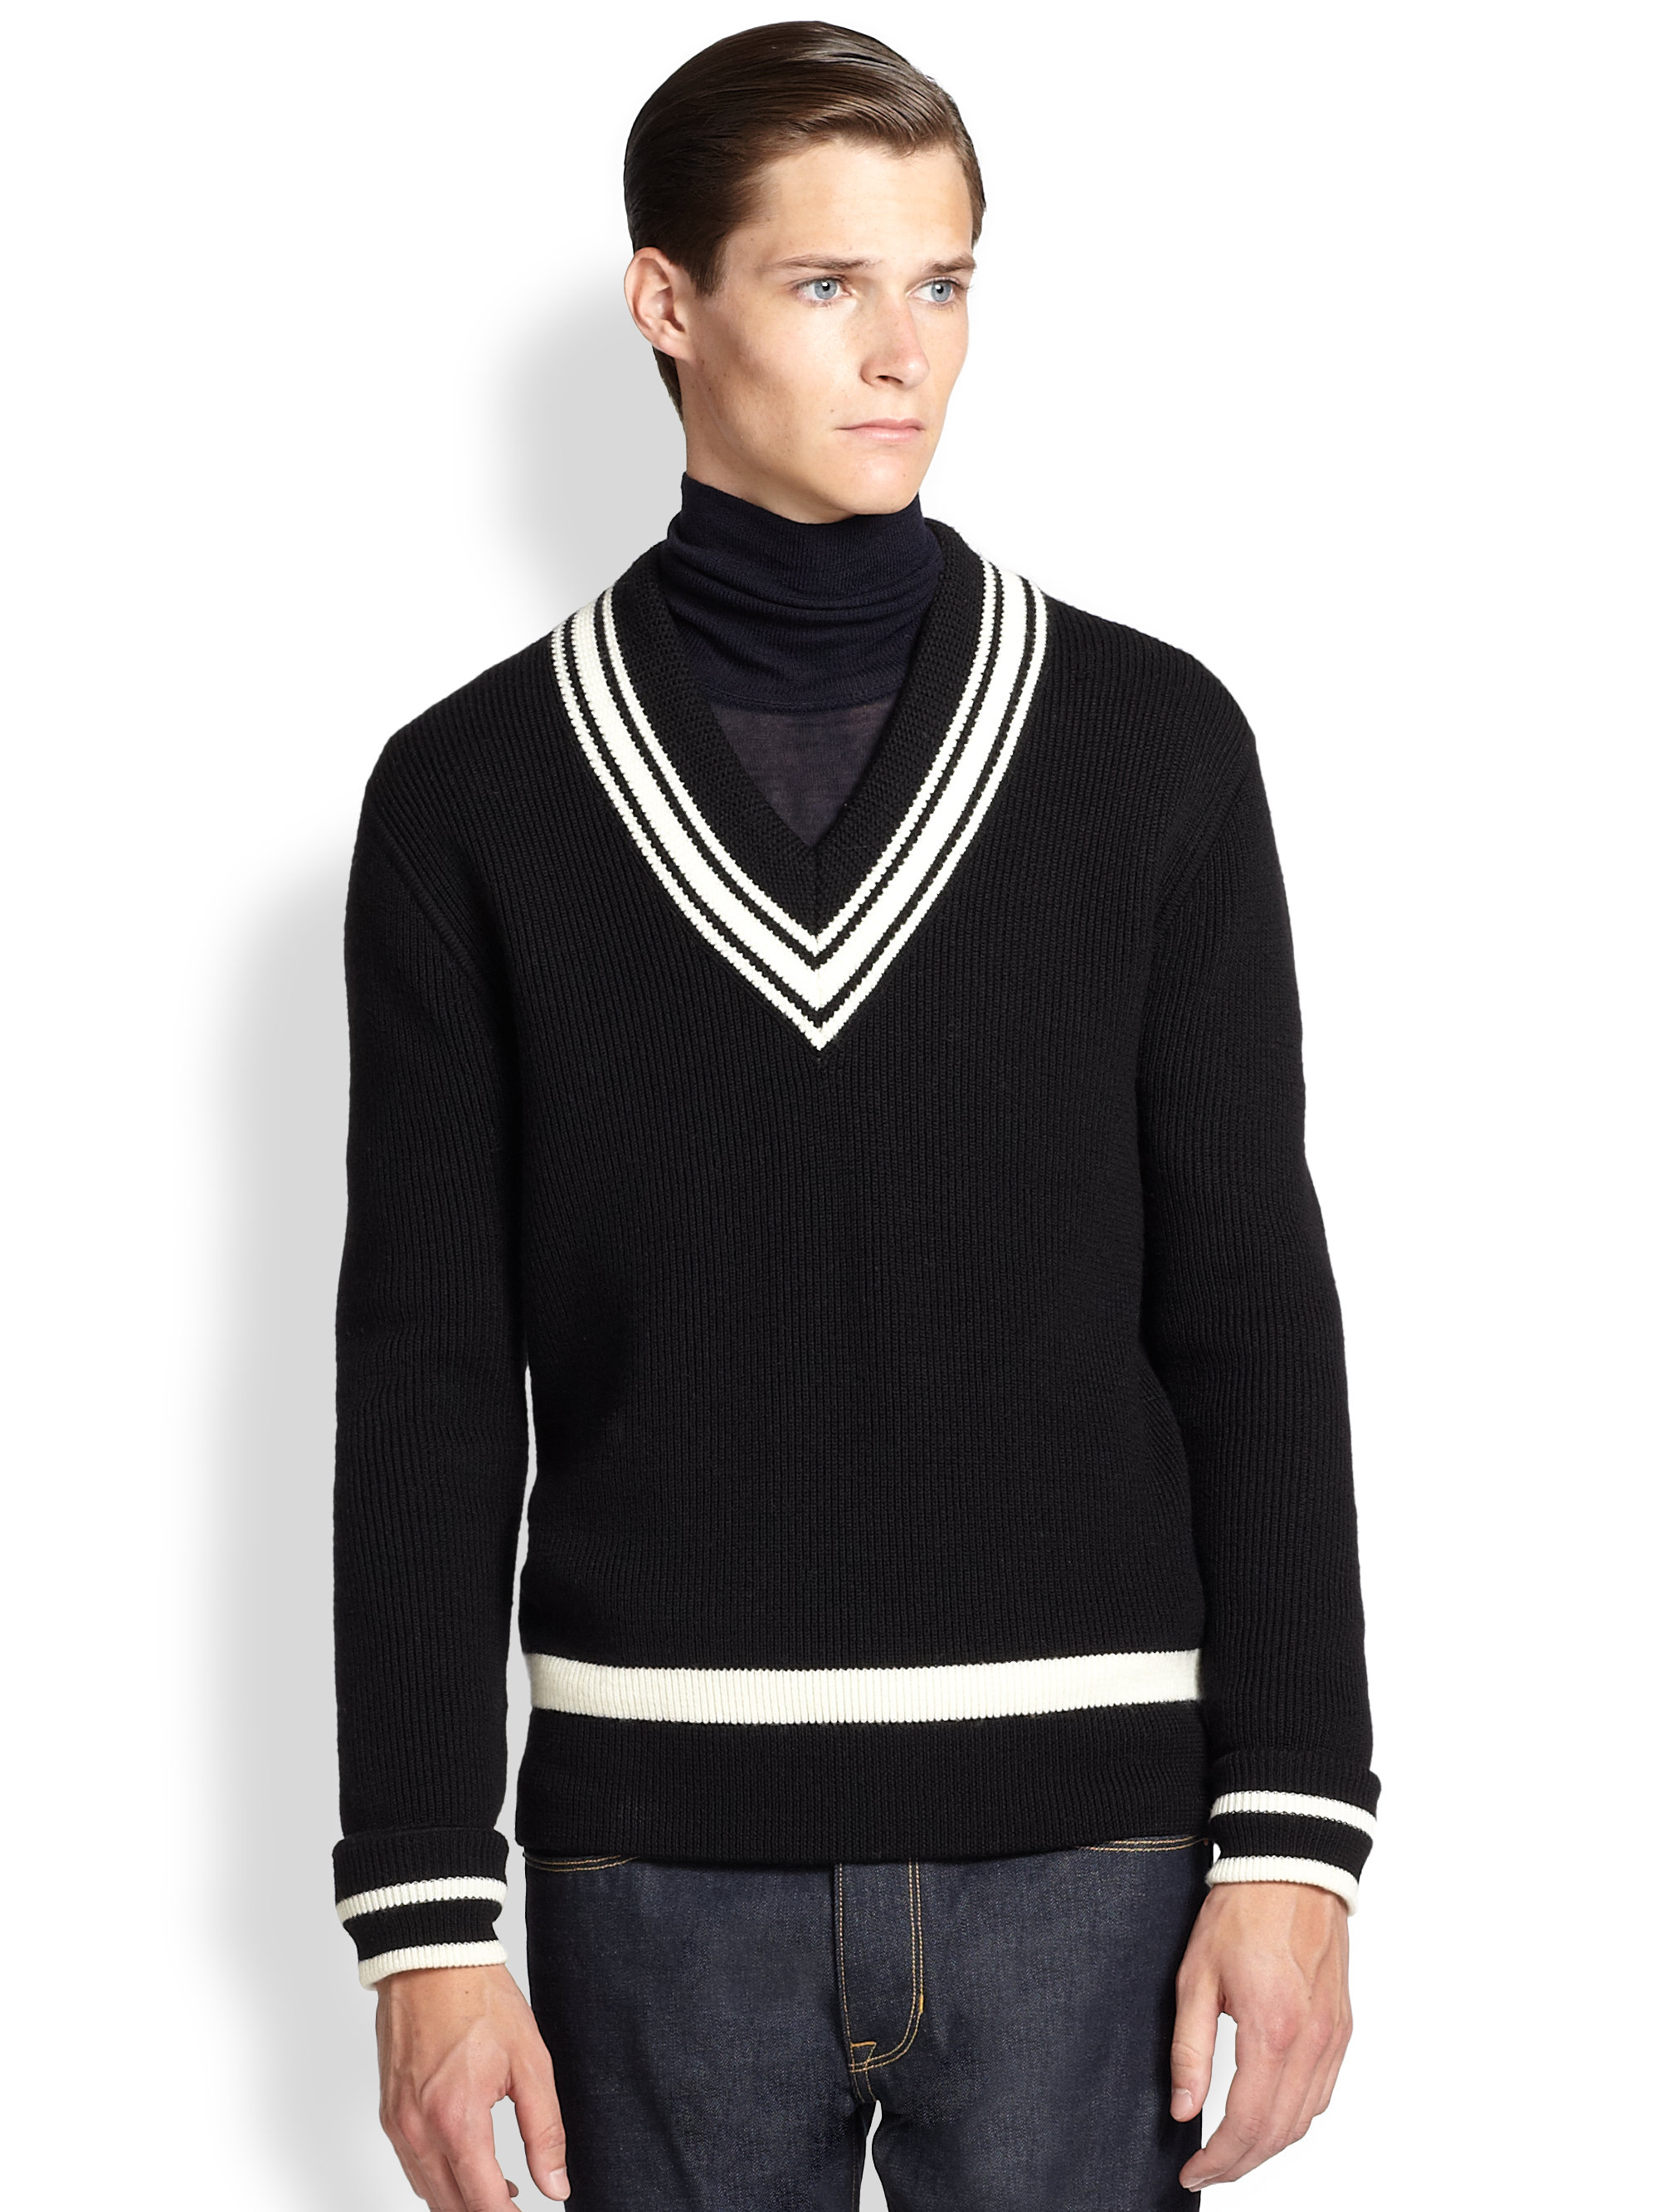 CW Mens Cricket SWEATER Team Wear Active Sports Wool Jumper V Neck Long/Full Sleeves Pullover